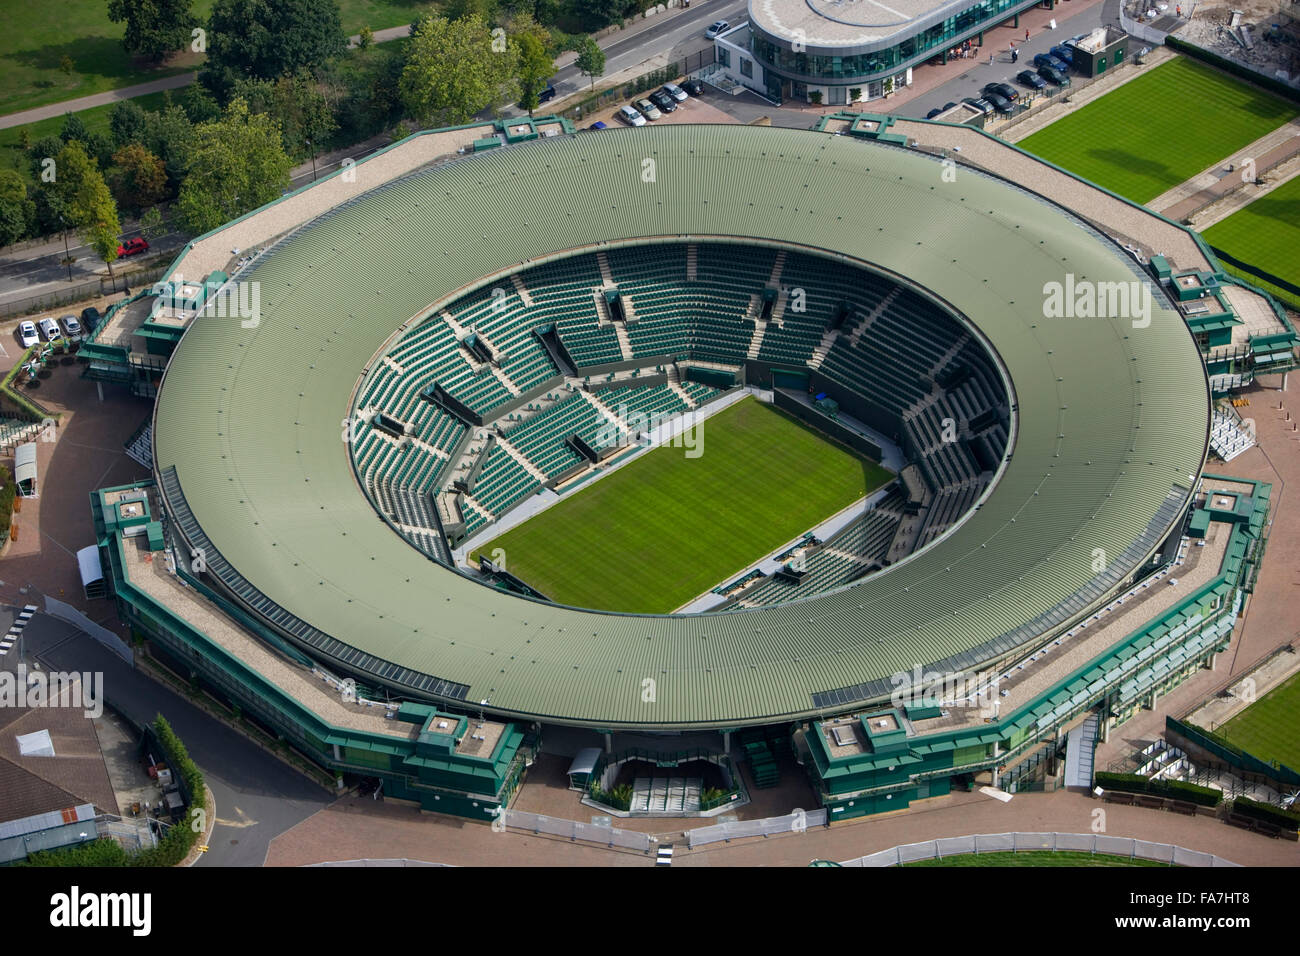  COURT, All England Lawn Tennis and Croquet Club, Wimbledon, London.  Opened in 1997, No. 1 Court is the next most prestigious tennis court at  Wimbledon after Centre Court, with a capacity